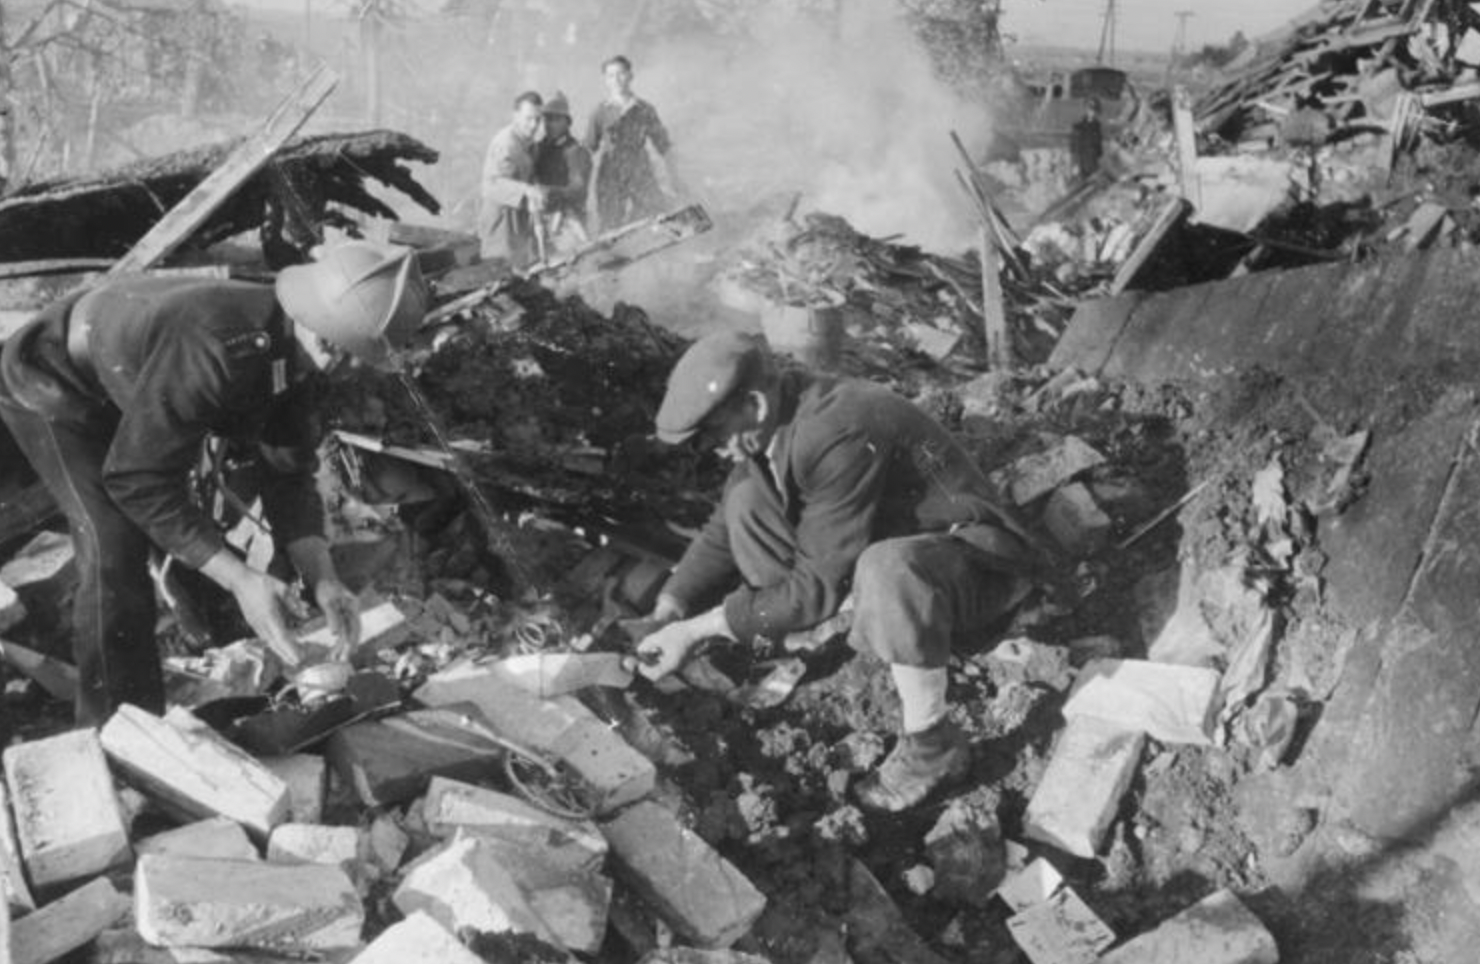 The city of Hamburg following a bombing. This image was provided to Wikimedia Commons by the <a href="http://www.bundesarchiv.de/">German Federal Archive</a> (Deutsches Bundesarchiv) as part of a <a href="https://commons.wikimedia.org/wiki/Commons:Bundesarchiv">cooperation project</a>. 